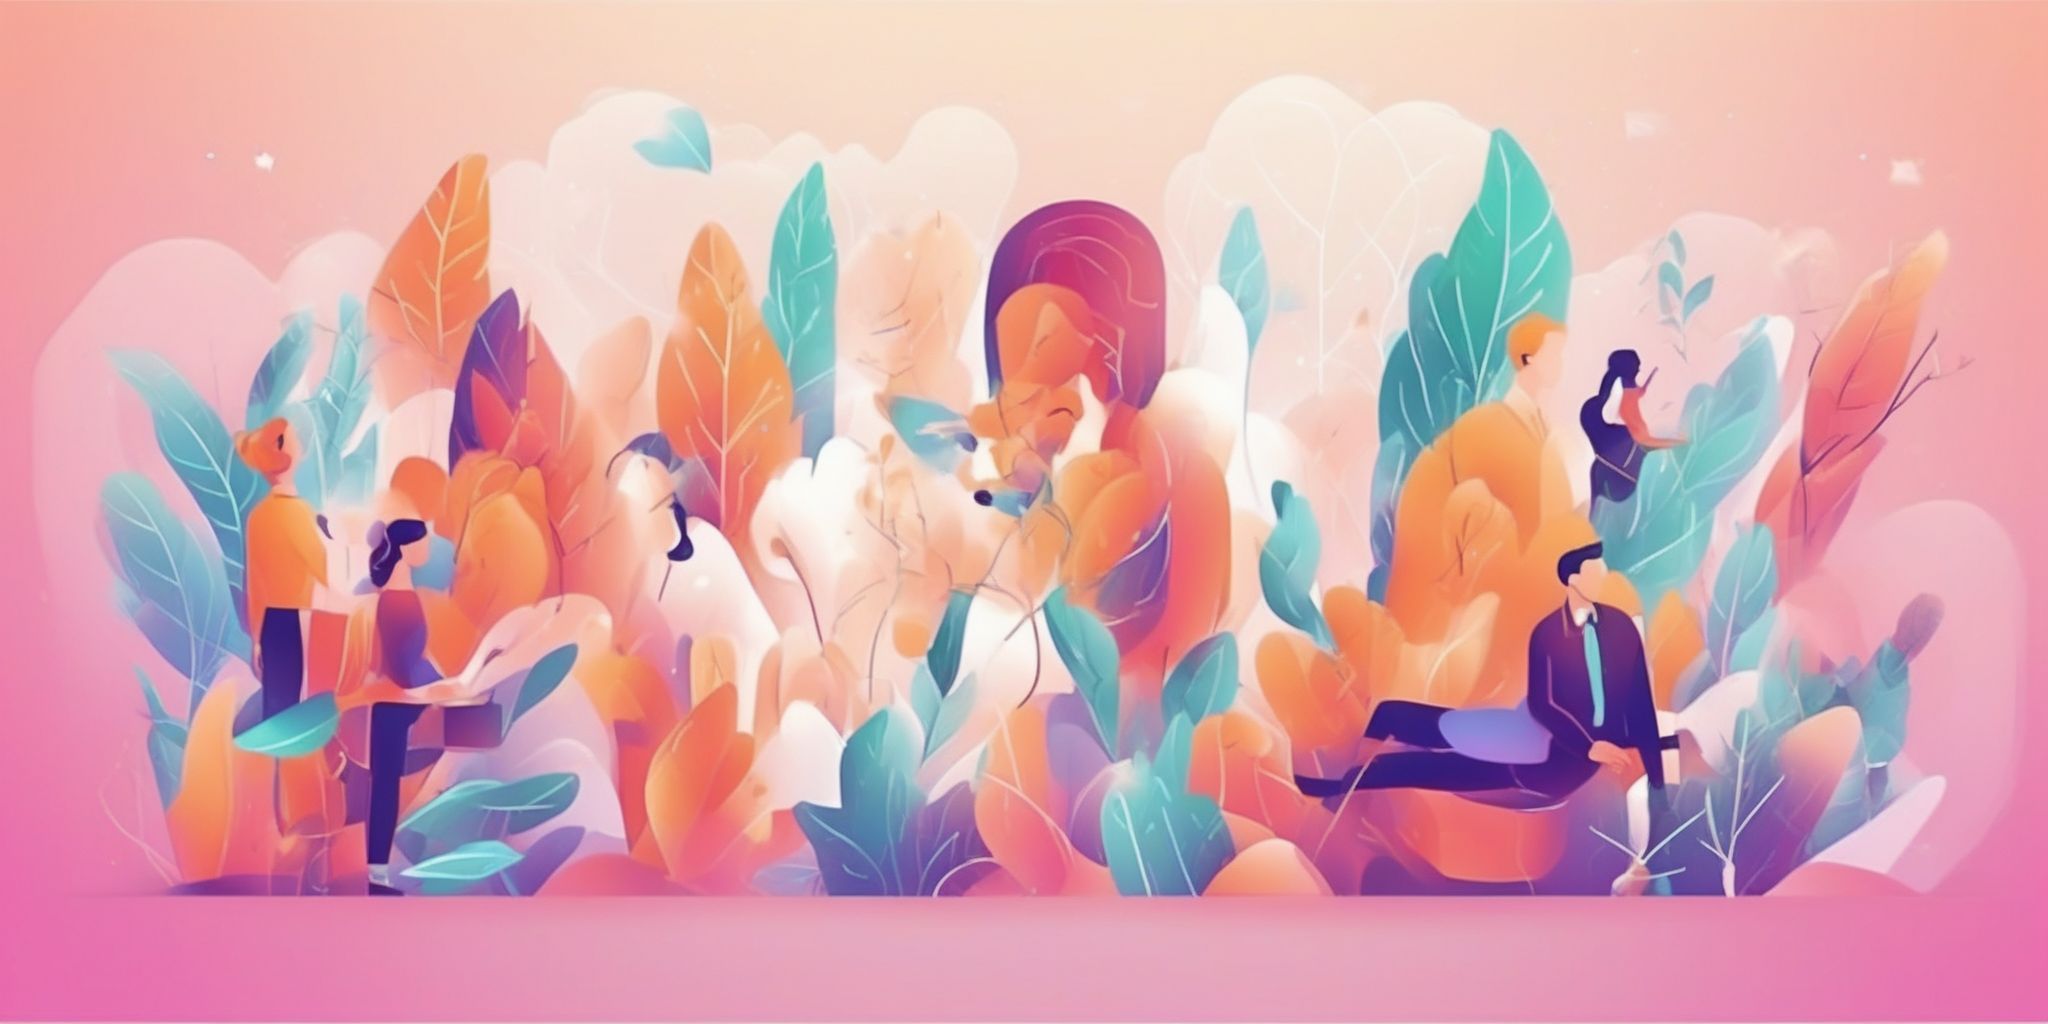 Success stories in illustration style with gradients and white background